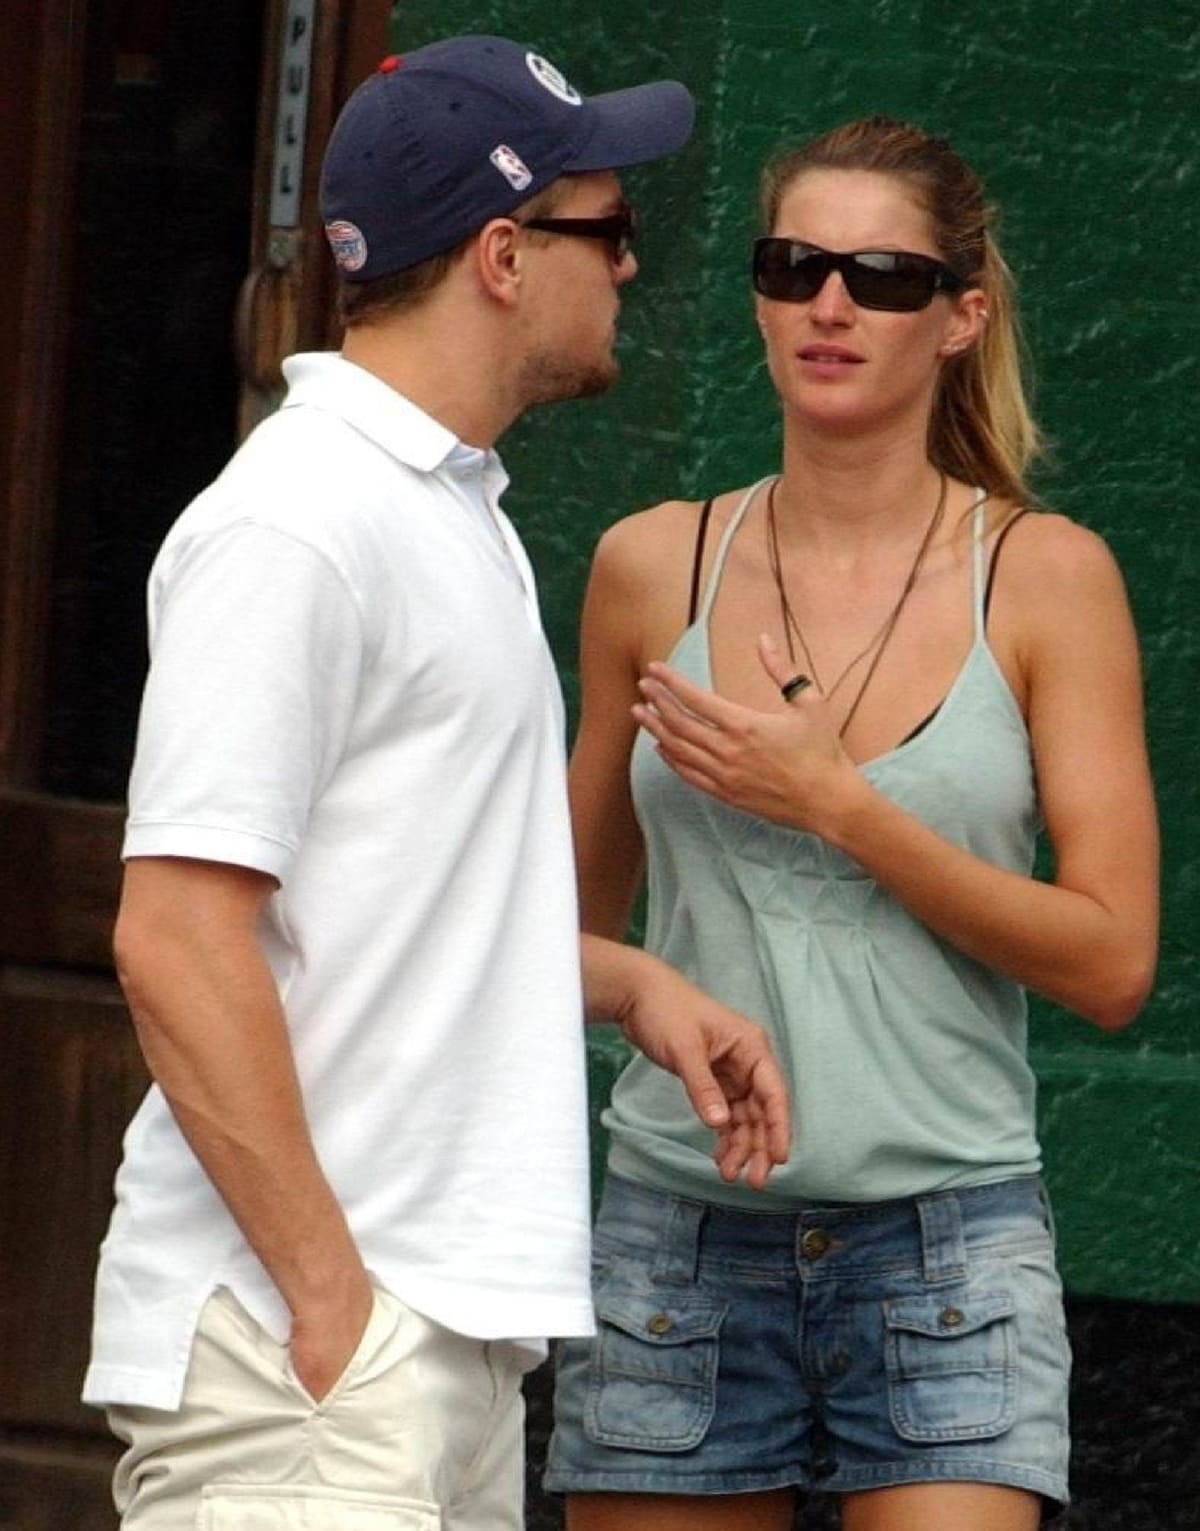 Gisele Bündchen broke up with Leonardo DiCaprio in 2005 when she realized he wasn't right for her